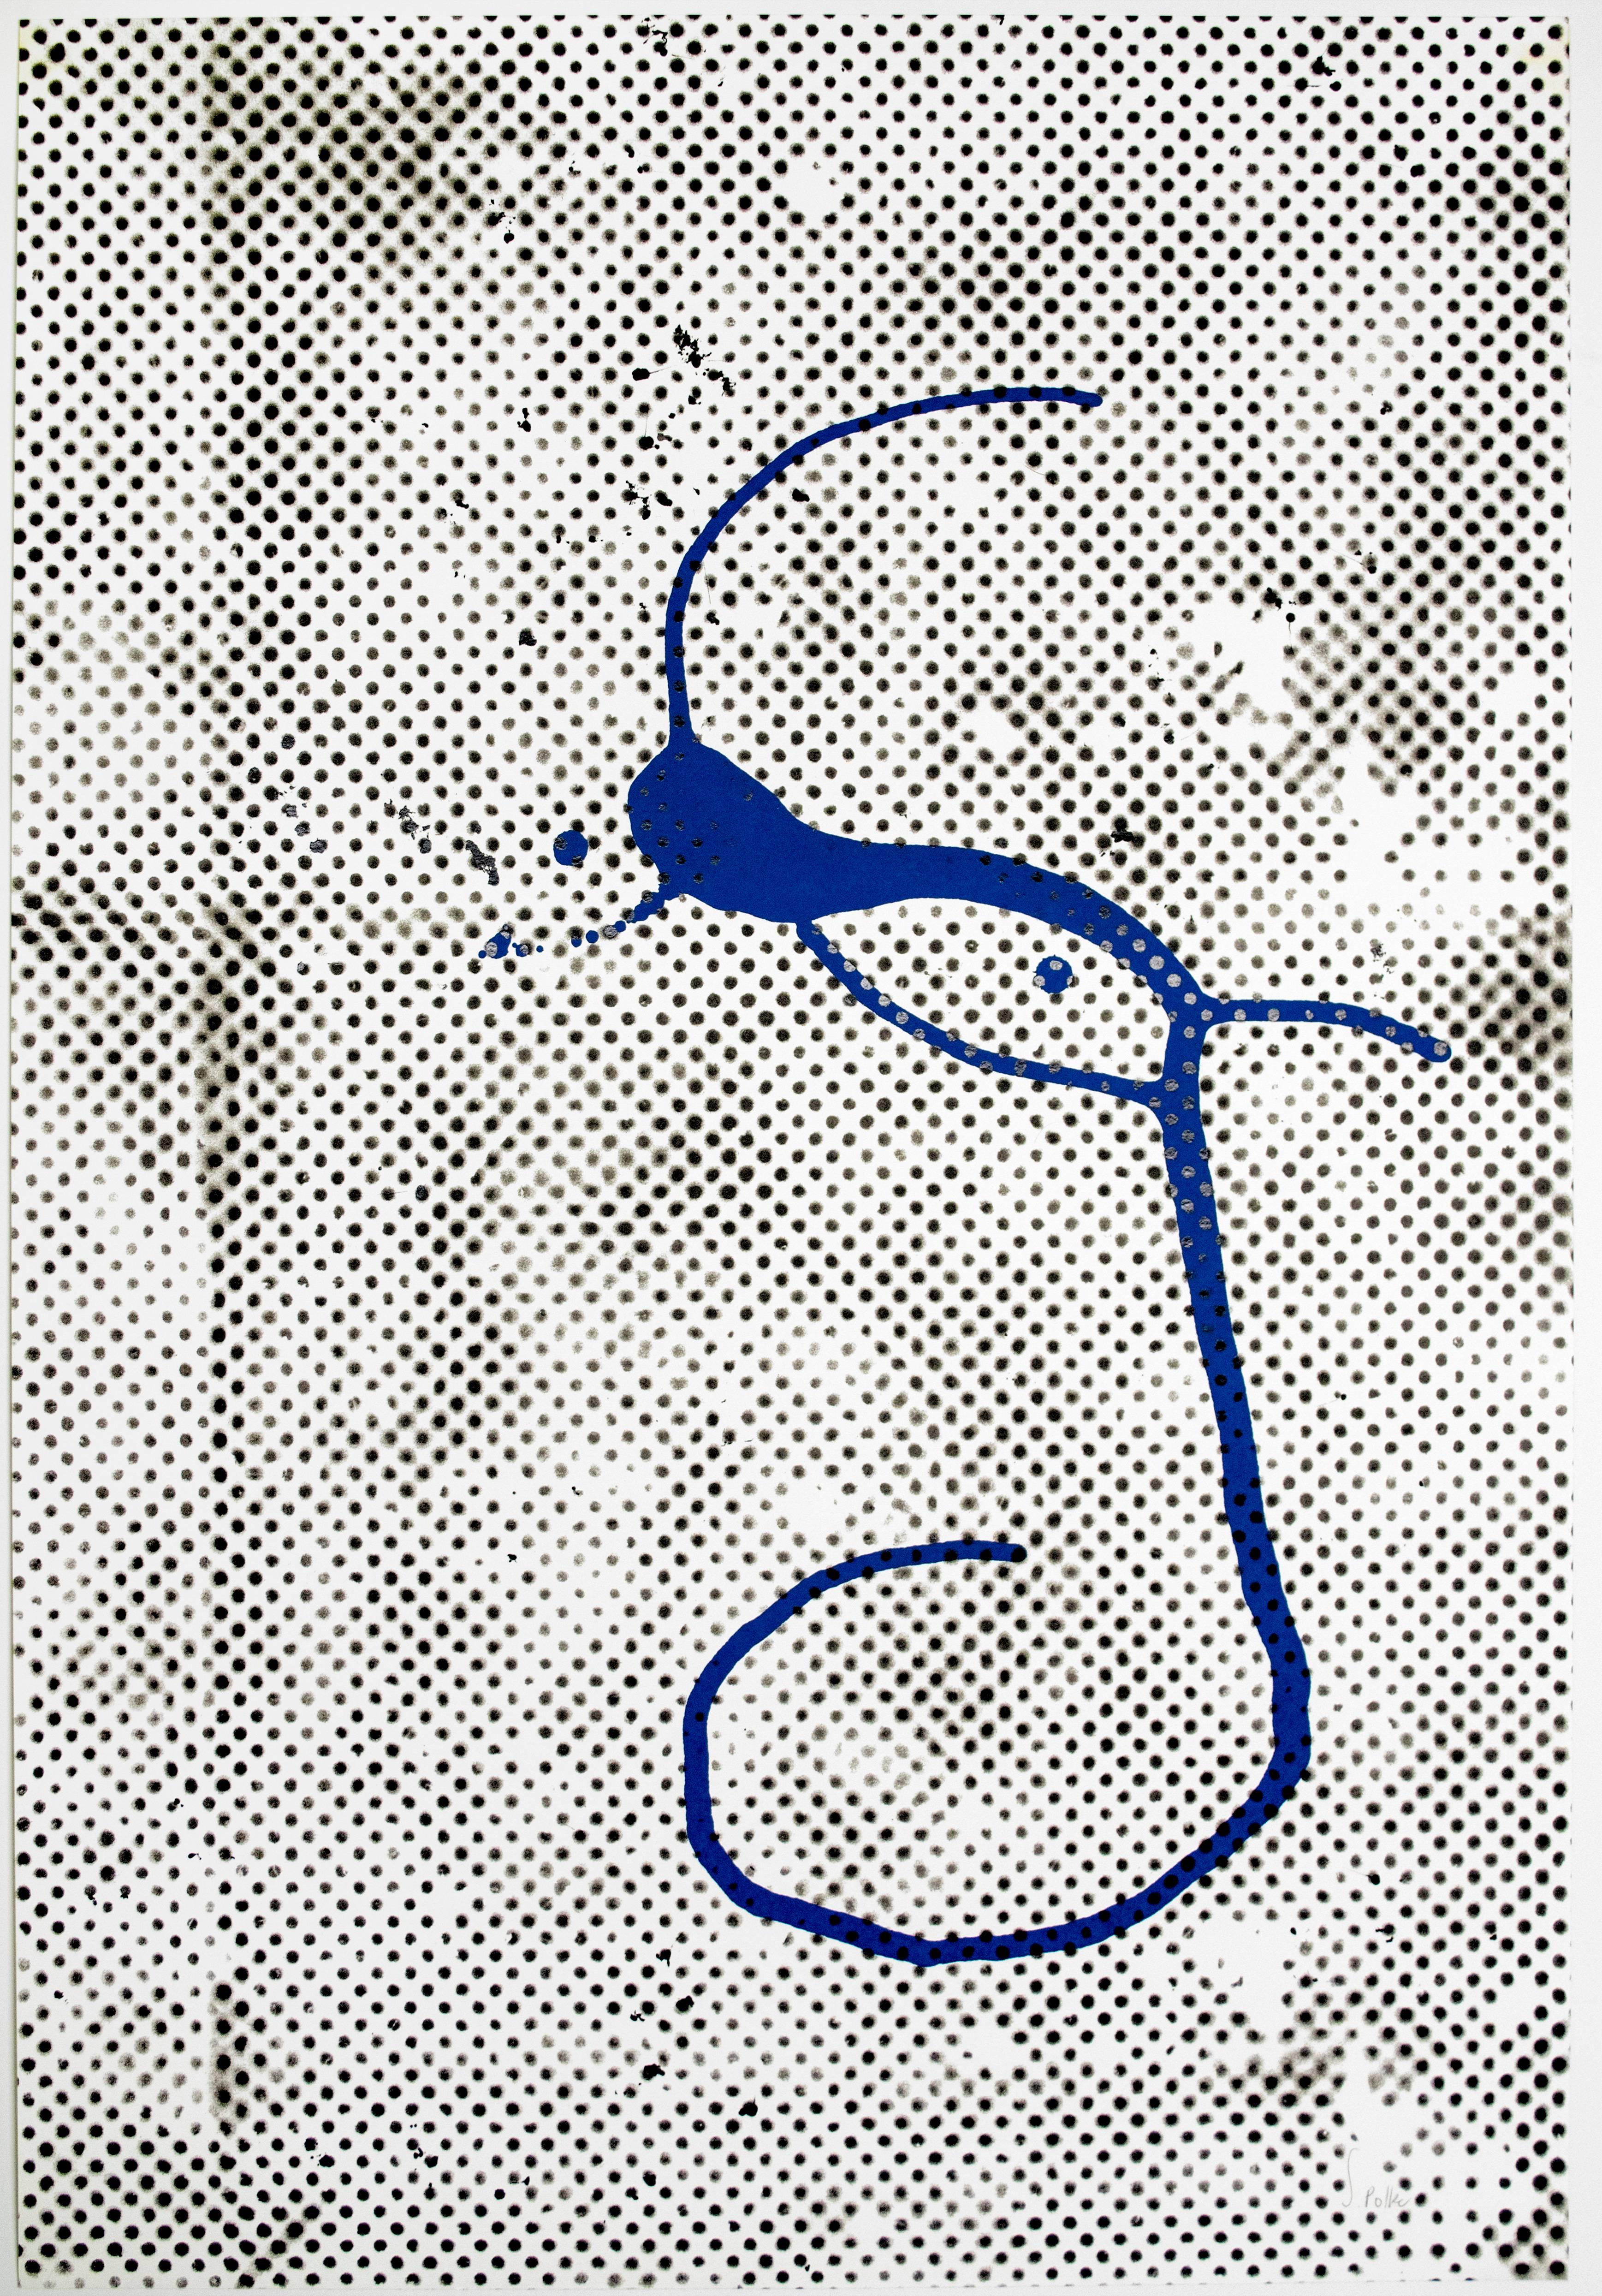 Sigmar Polke Abstract Print - Untitled